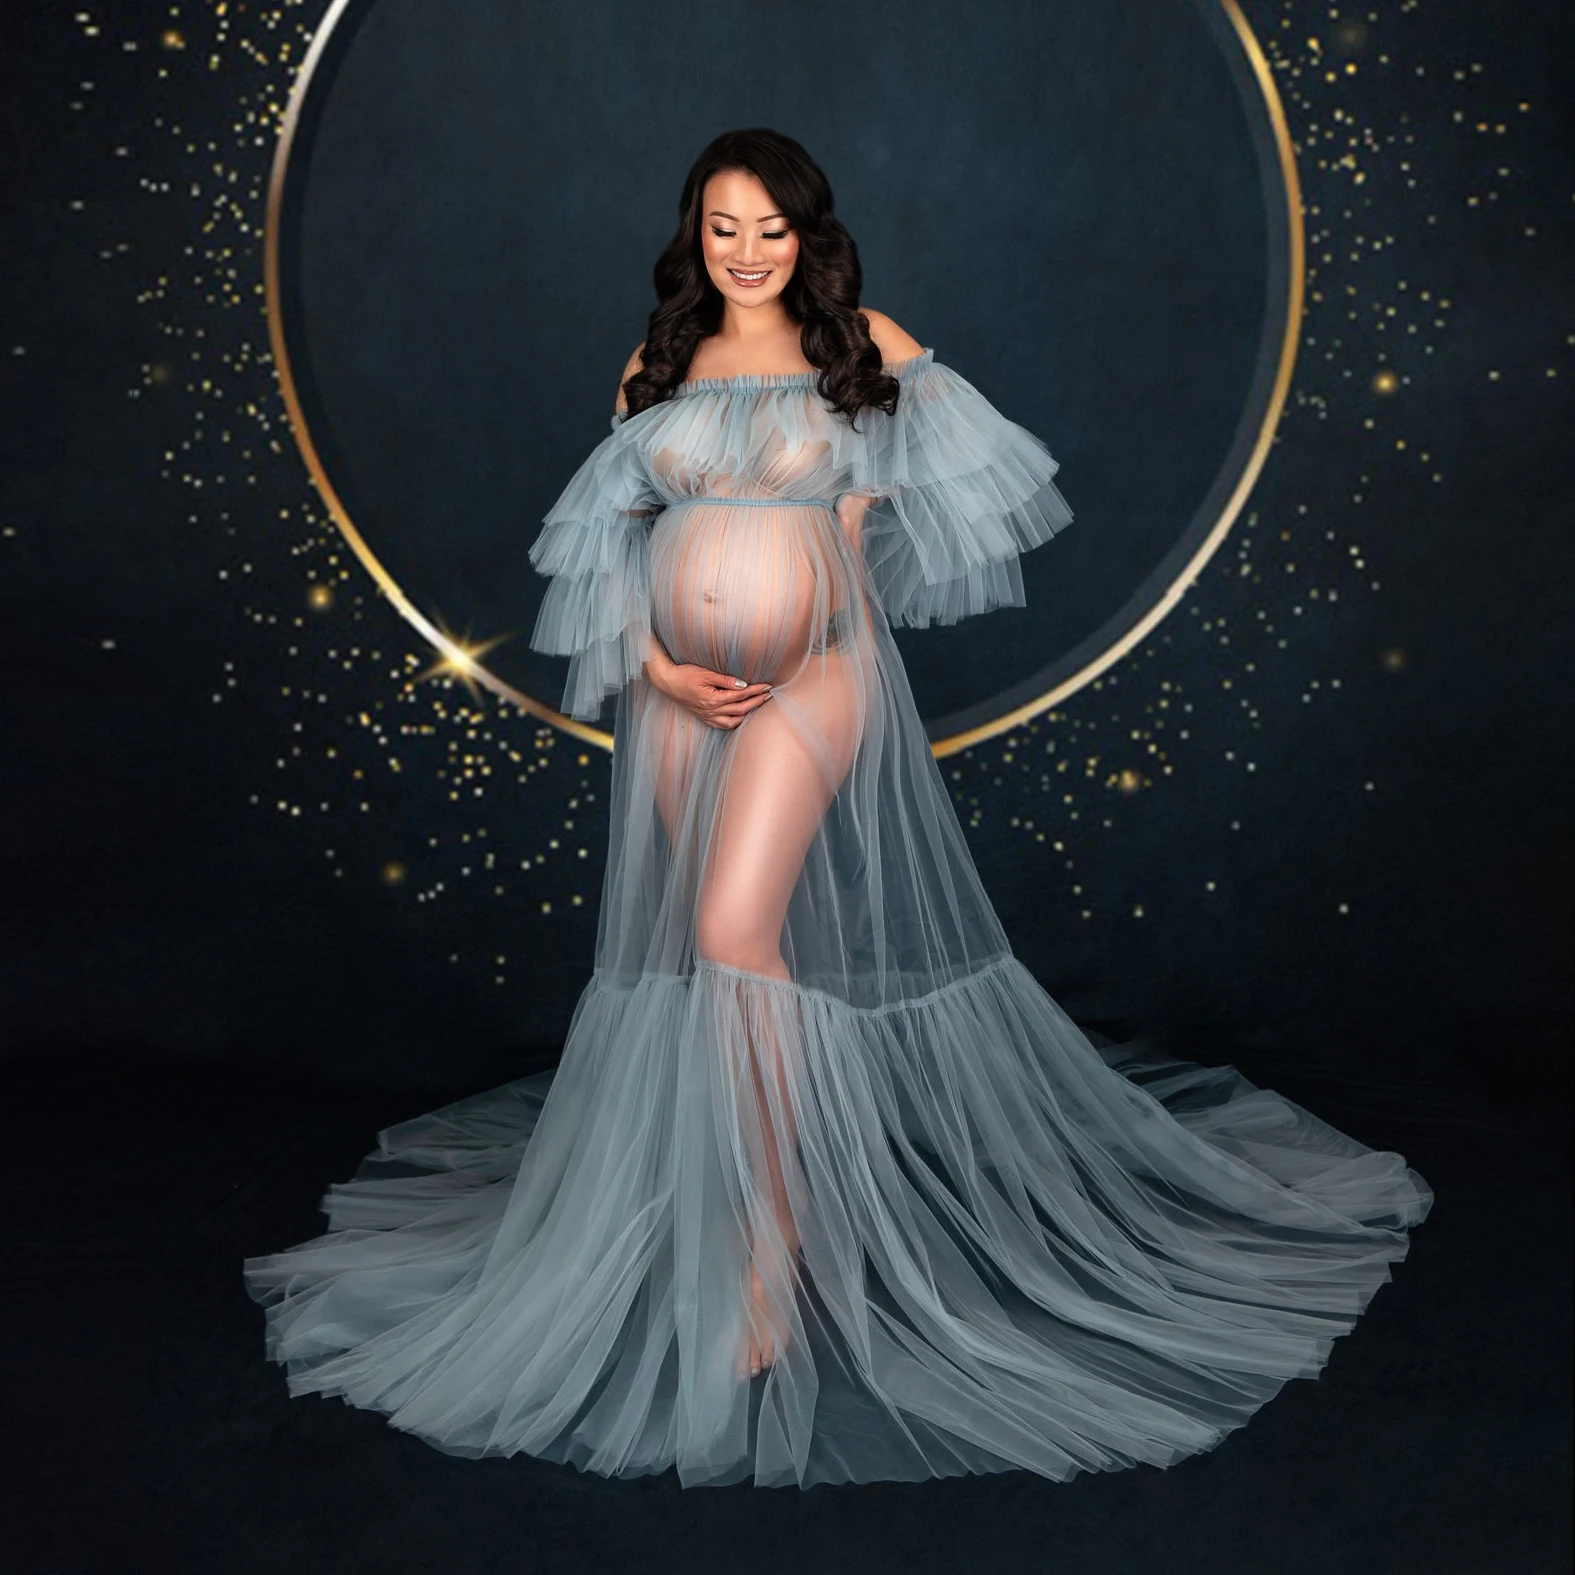 

Dusty Blue See Thru Tulle Maternity Dress for Photoshoot Off the Shoulder Ruffled Tulle Babyshower Photography Dresses Pregnancy